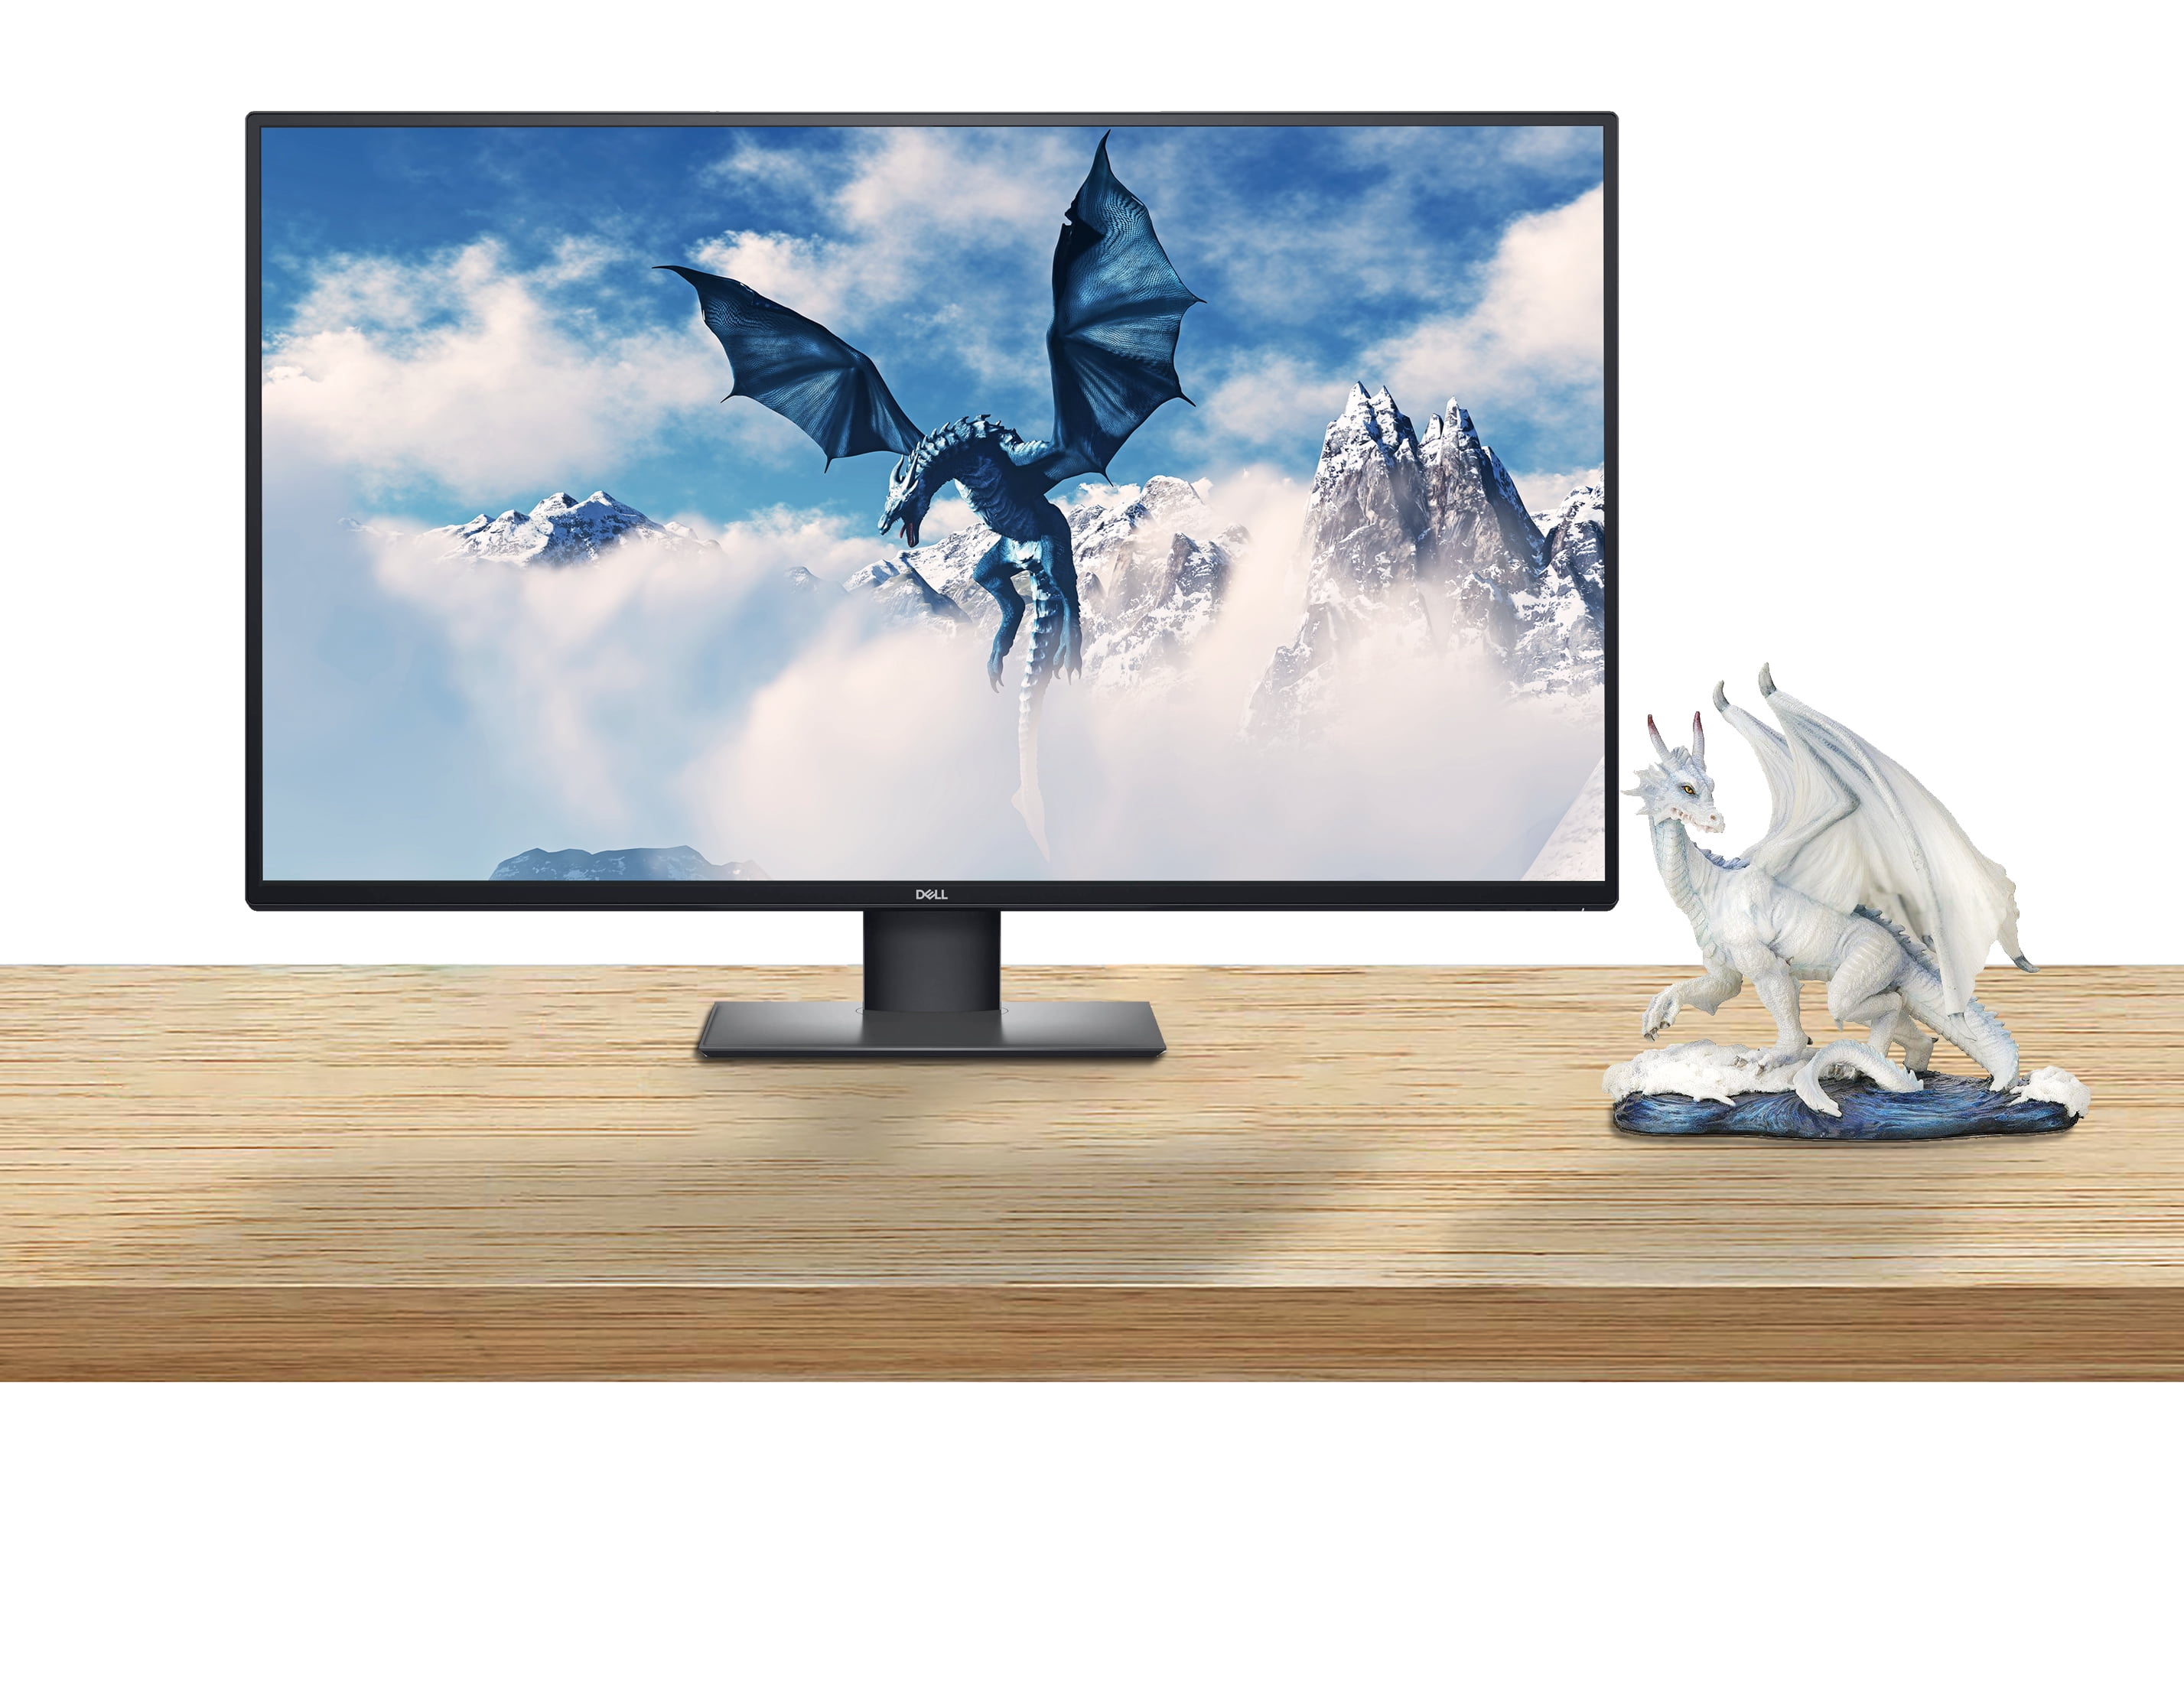 Dell U4320Q 43 Inch 4K UHD Gaming Monitor with USB-C, DisplayPort, HDMI,  Integrated Speakers, Vesa Compatible, Height Adjustable, Swivel, Tilt,  Picture-by-Picture (PBP), Bundle with Ice Dragon Statue 